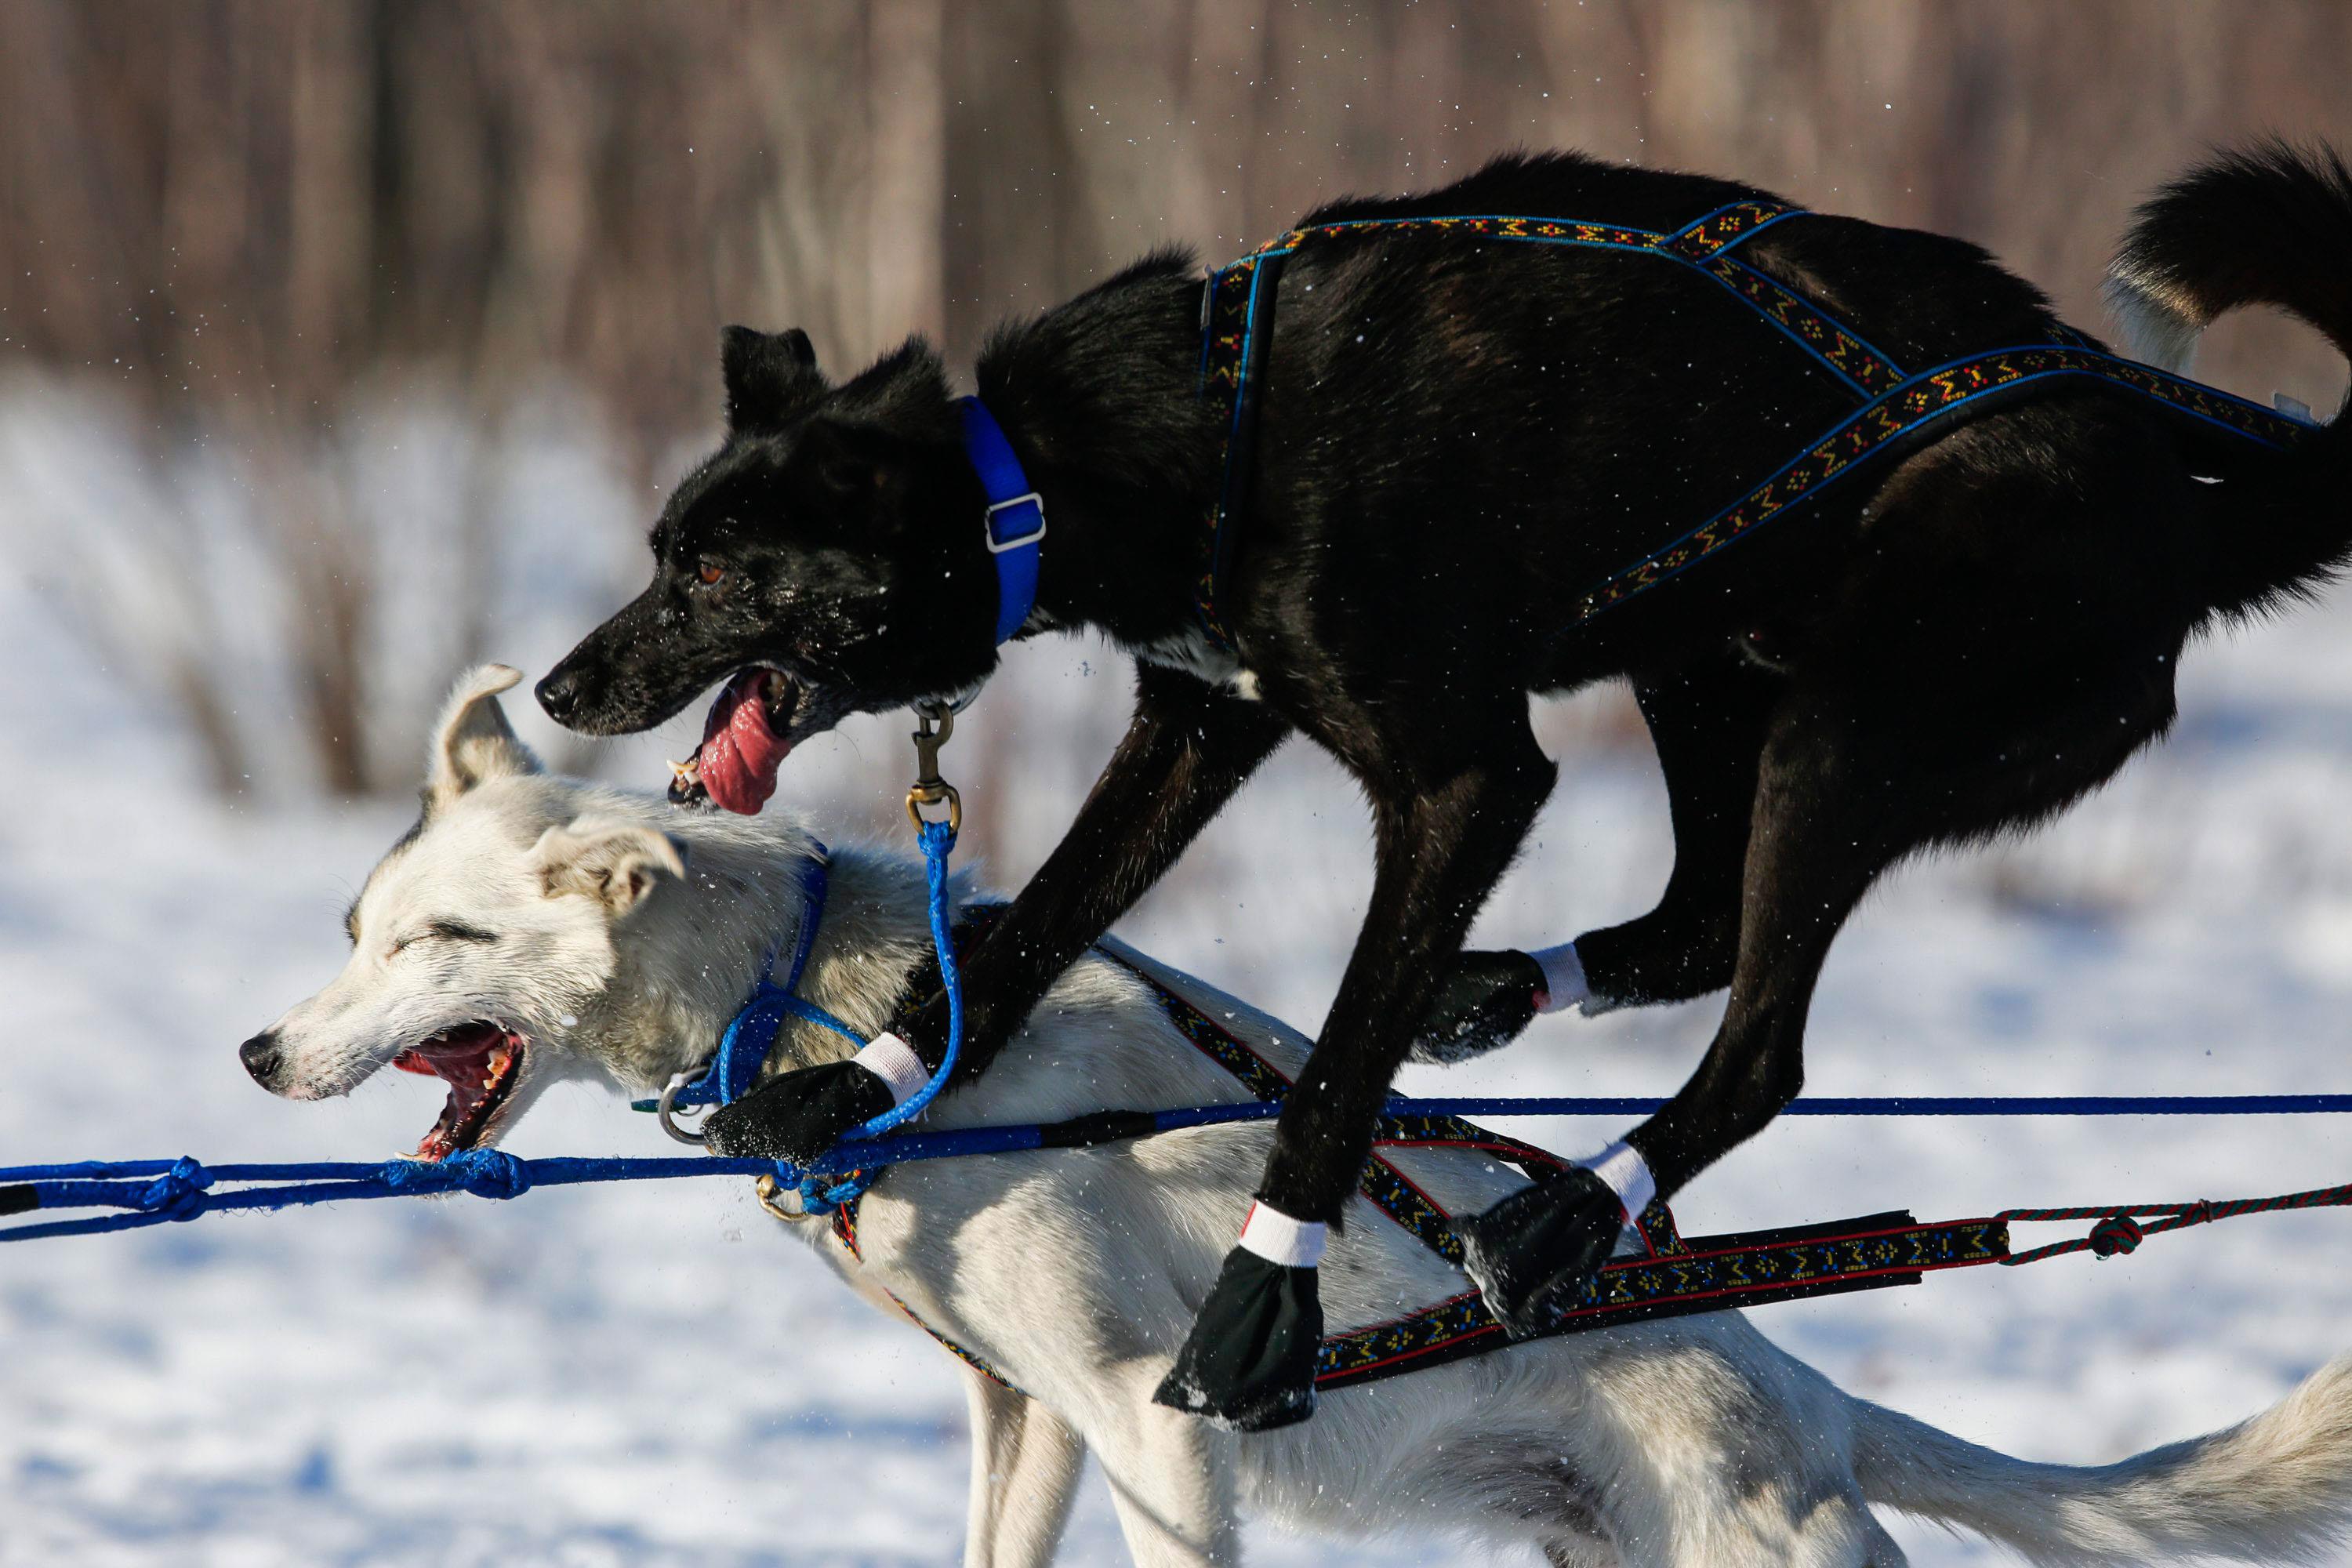 Martin Koenig's team gets tangled up after leaving the start chute at the restart of the Iditarod Tr